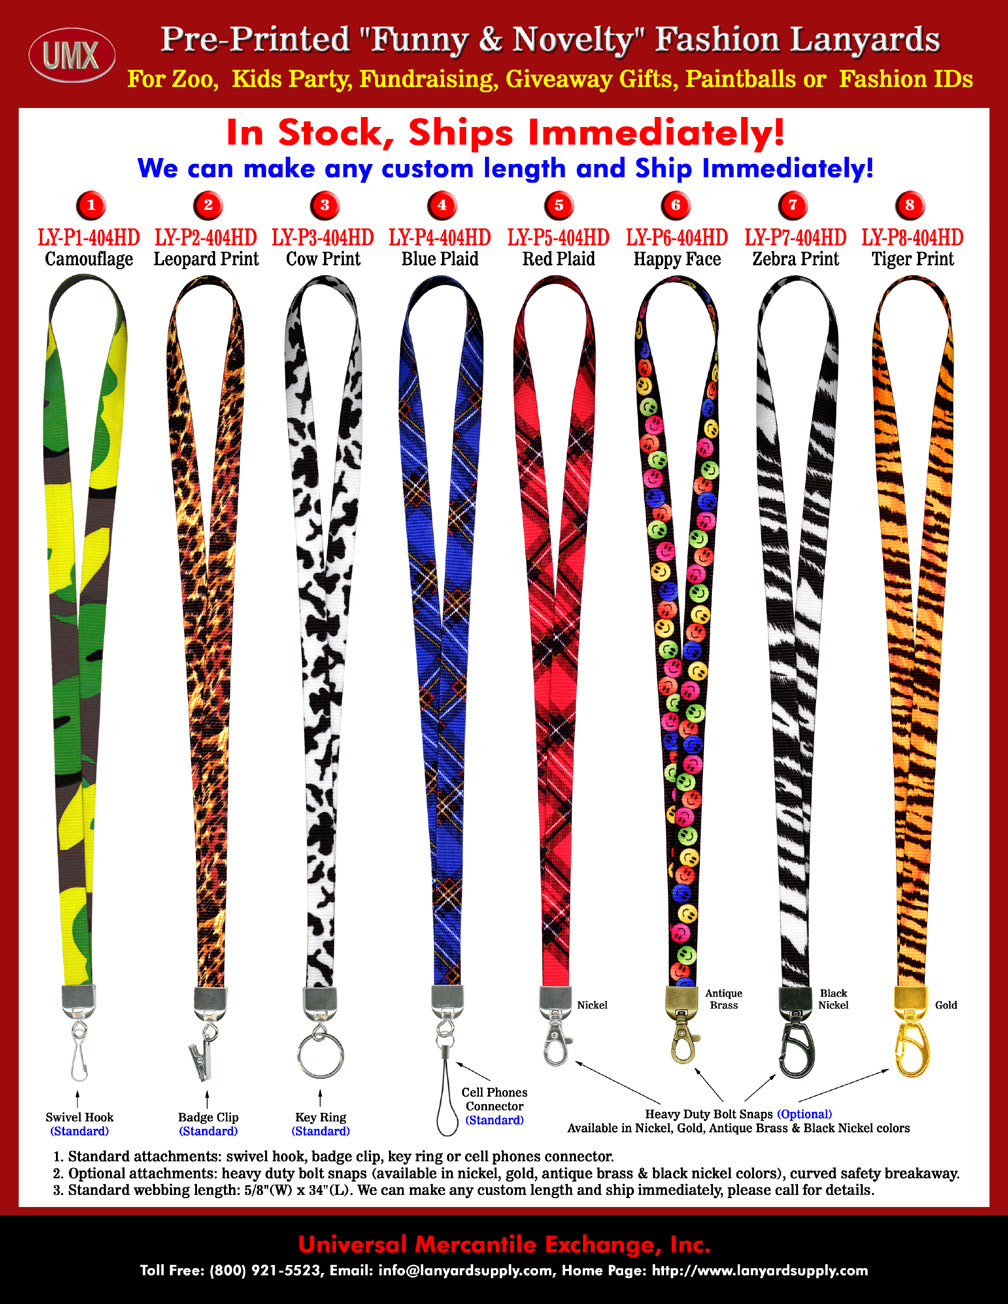 Pre-Printed Fancy Wireless, Cellular, Palm Pilot, Mobile and Photo Cell Phone Lanyards/Carrying Straps/Holders/Carriers - Cell Phone Accessory Supplies.